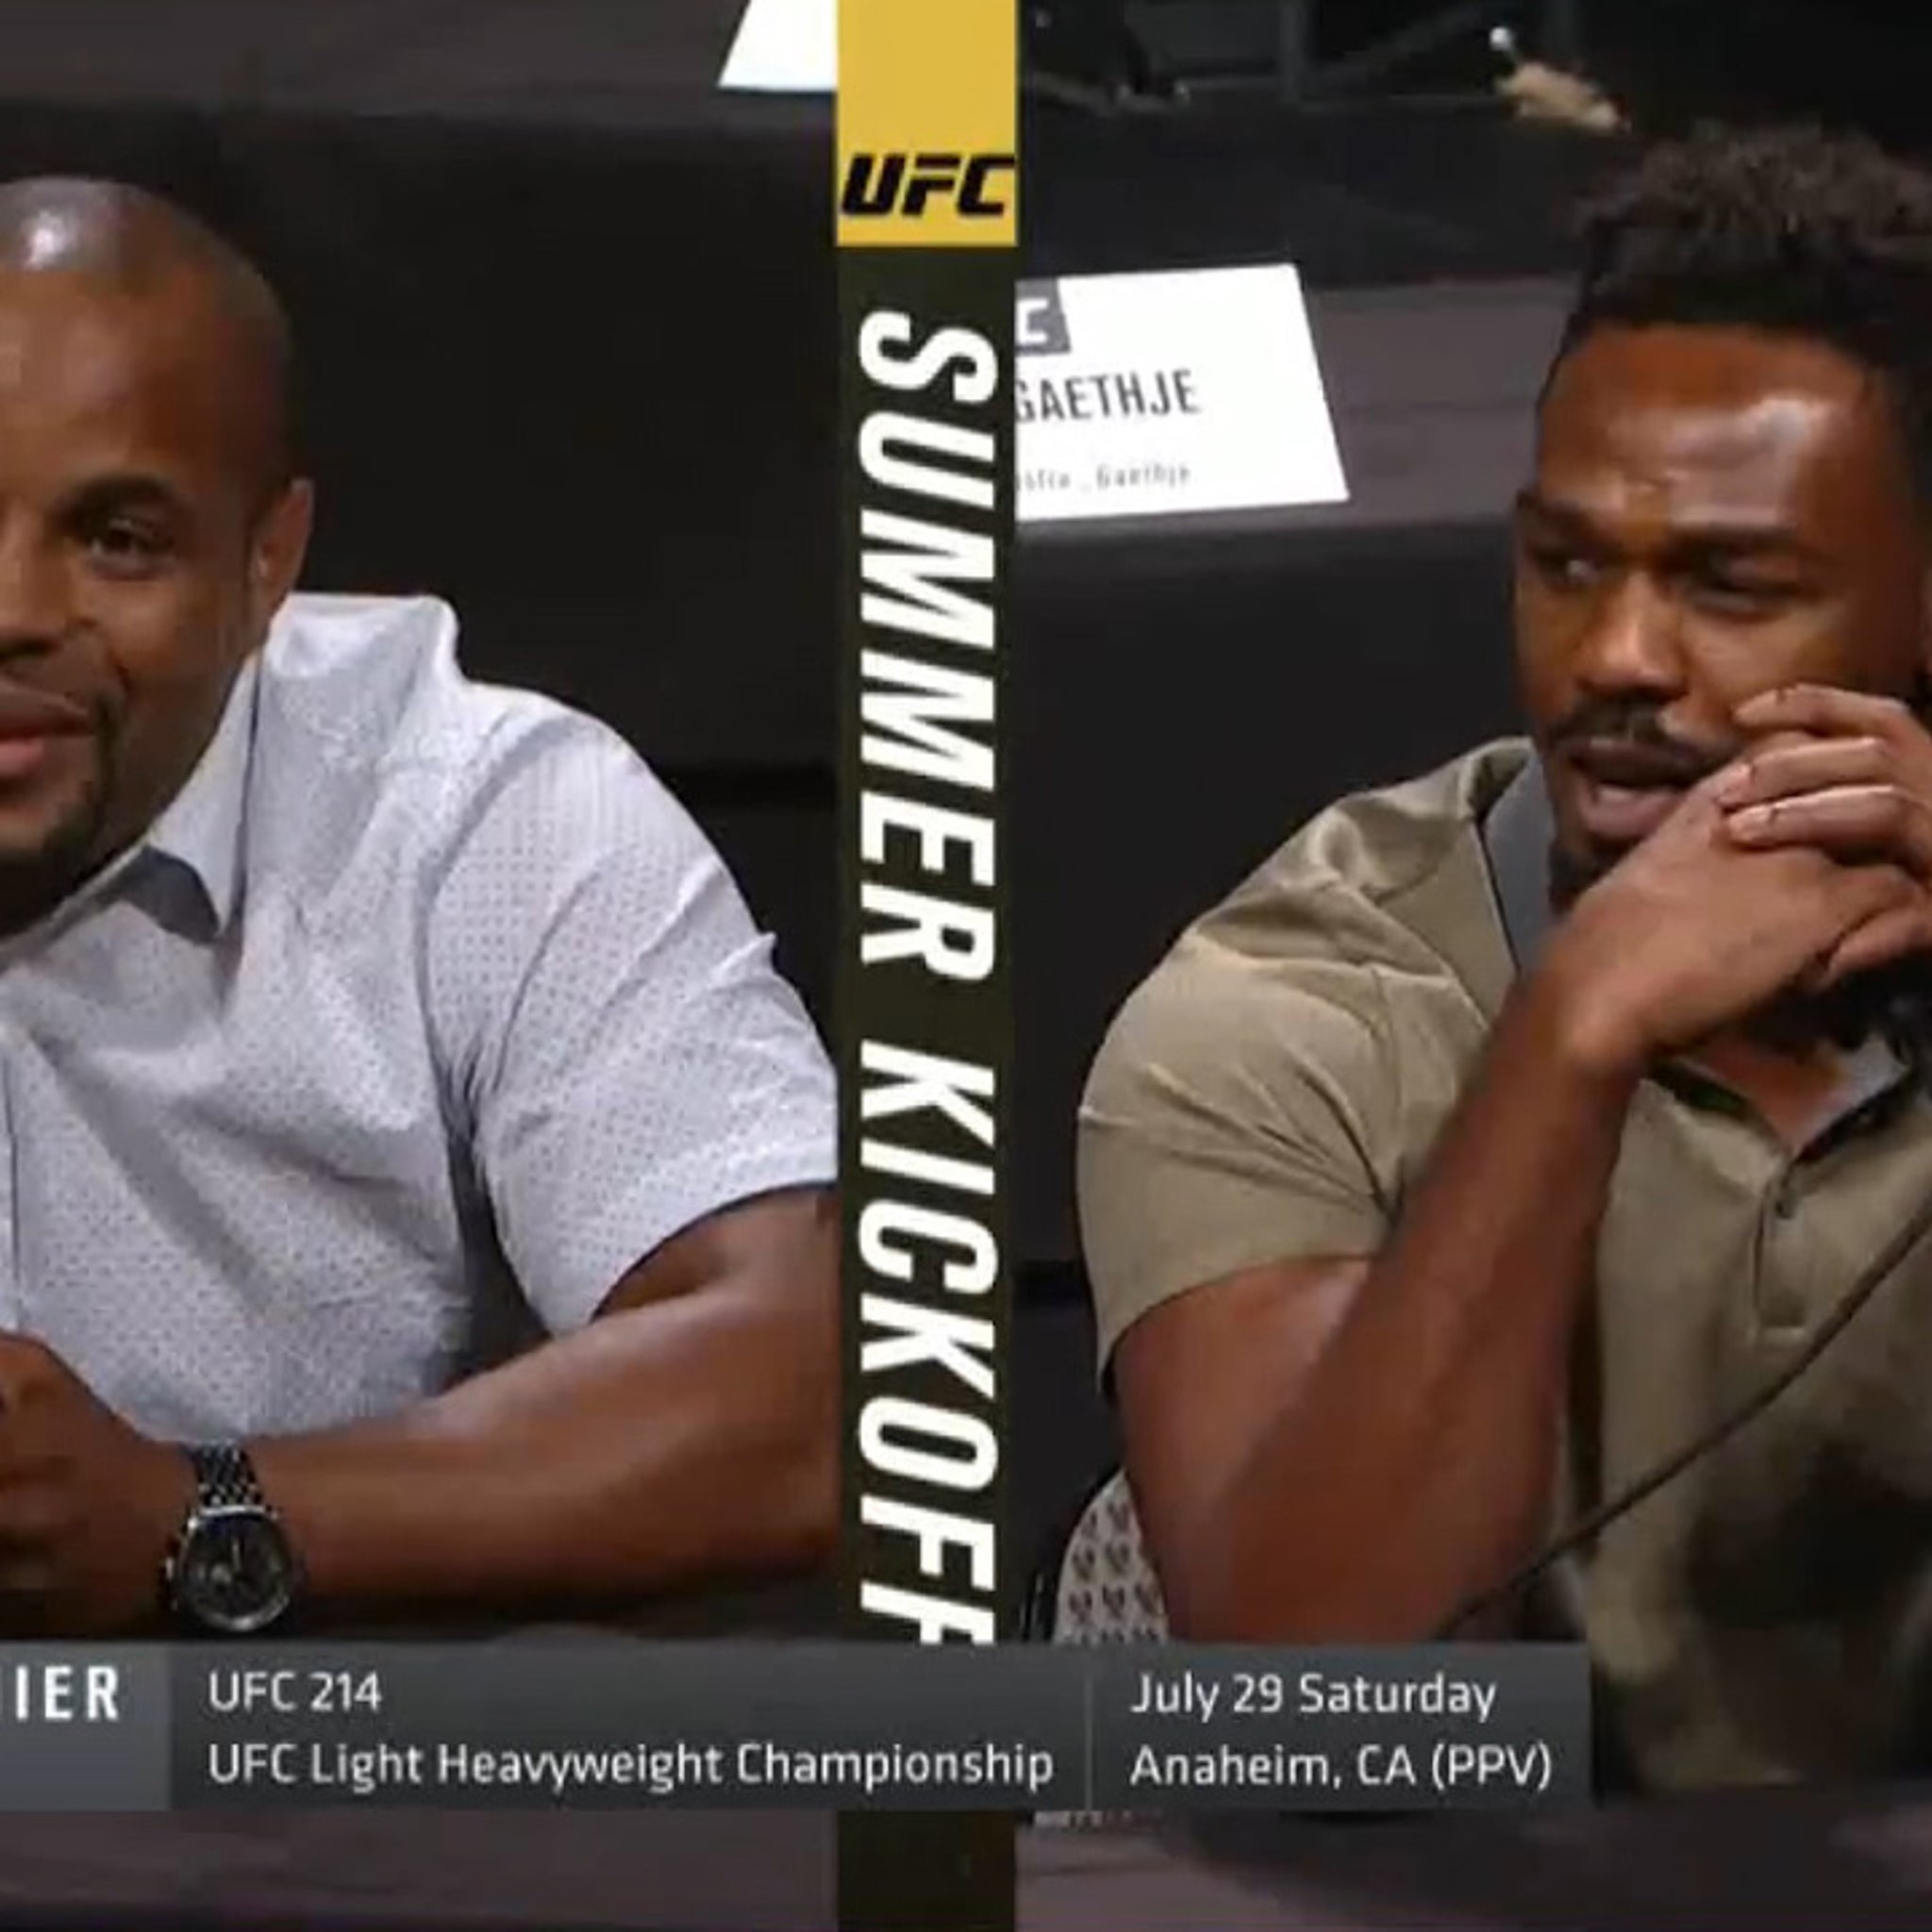 Jones to Cormier: 'I After a Weekend Cocaine' (VIDEO)